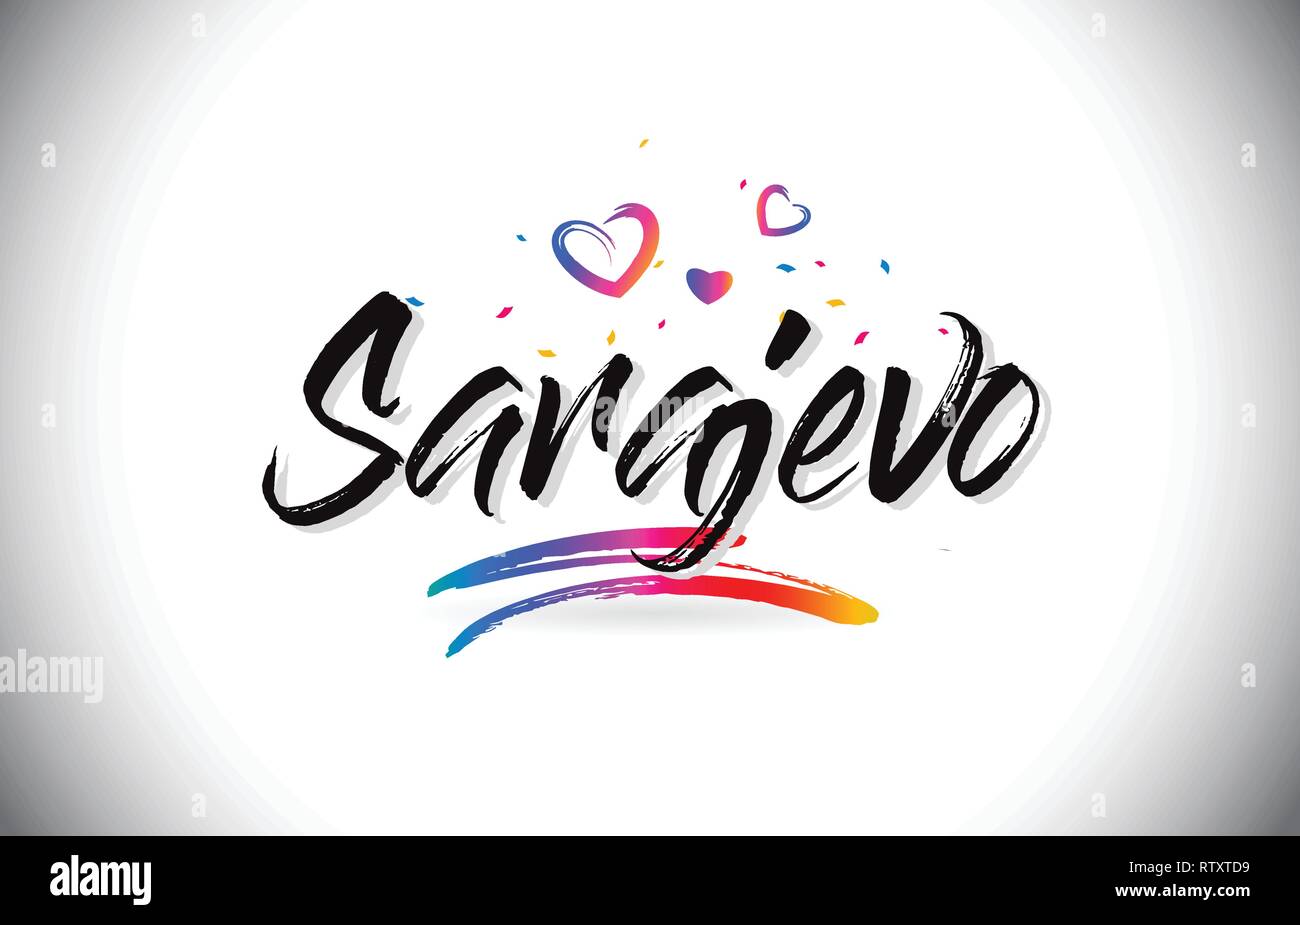 Sarajevo Welcome To Word Text with Love Hearts and Creative Handwritten Font Design Vector Illustration. Stock Vector